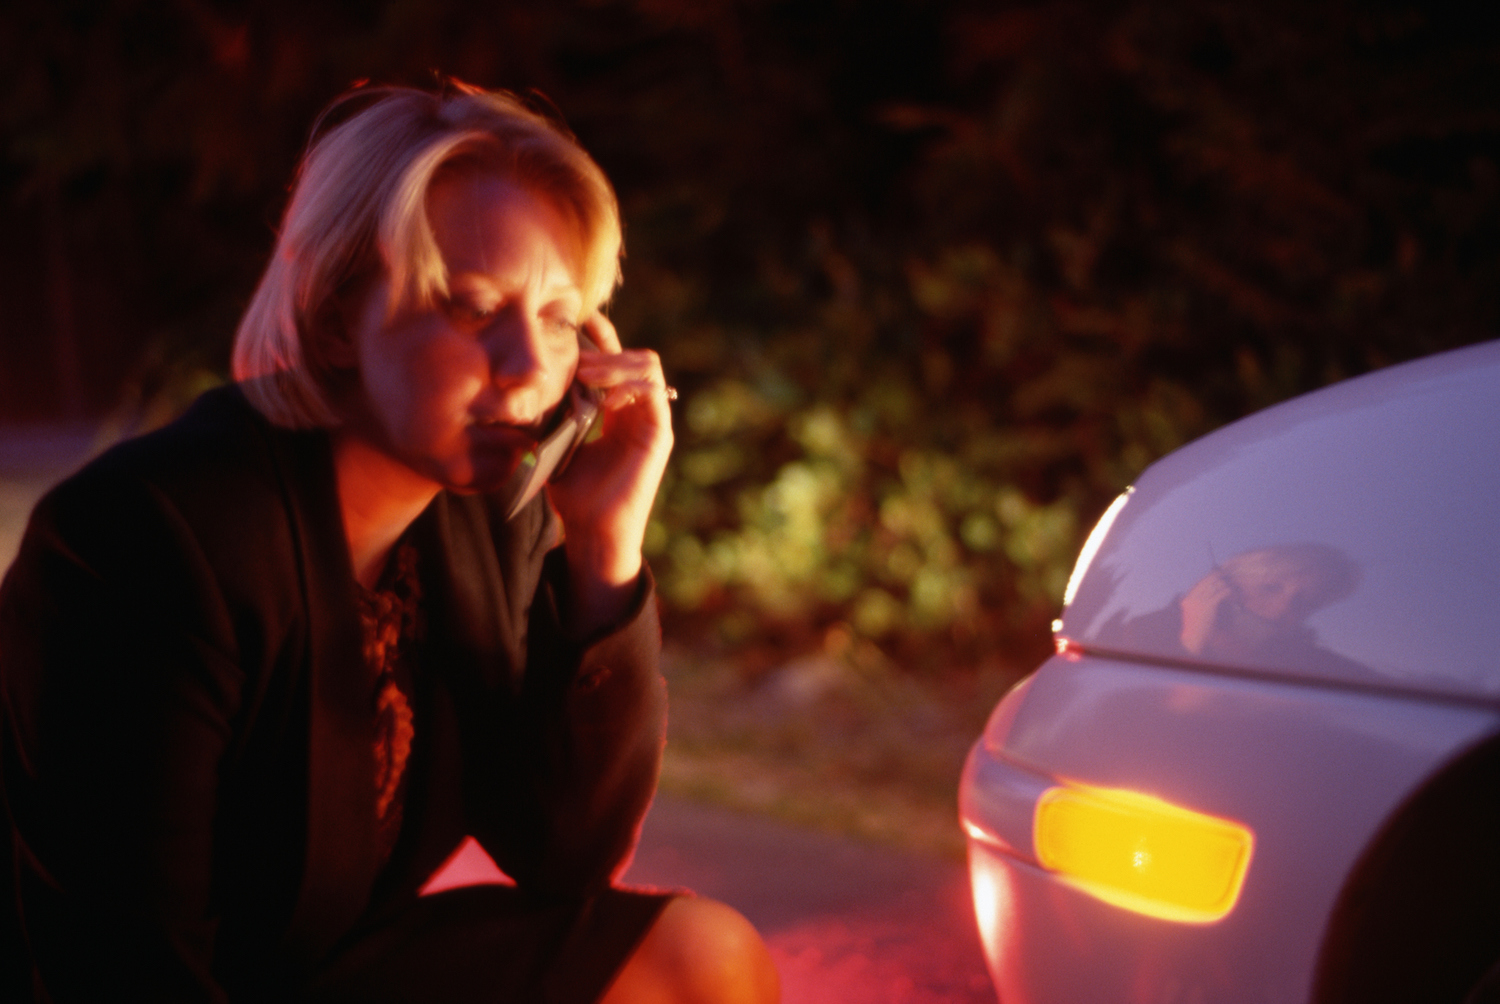 This is a photo of a woman examining the front of her sedan and calling for help. 466,000 Sonata sedans are at risk of a turn signal malfunction and affected by Hyundai recall. Doug Wilson/CORBIS/Corbis via Getty Images